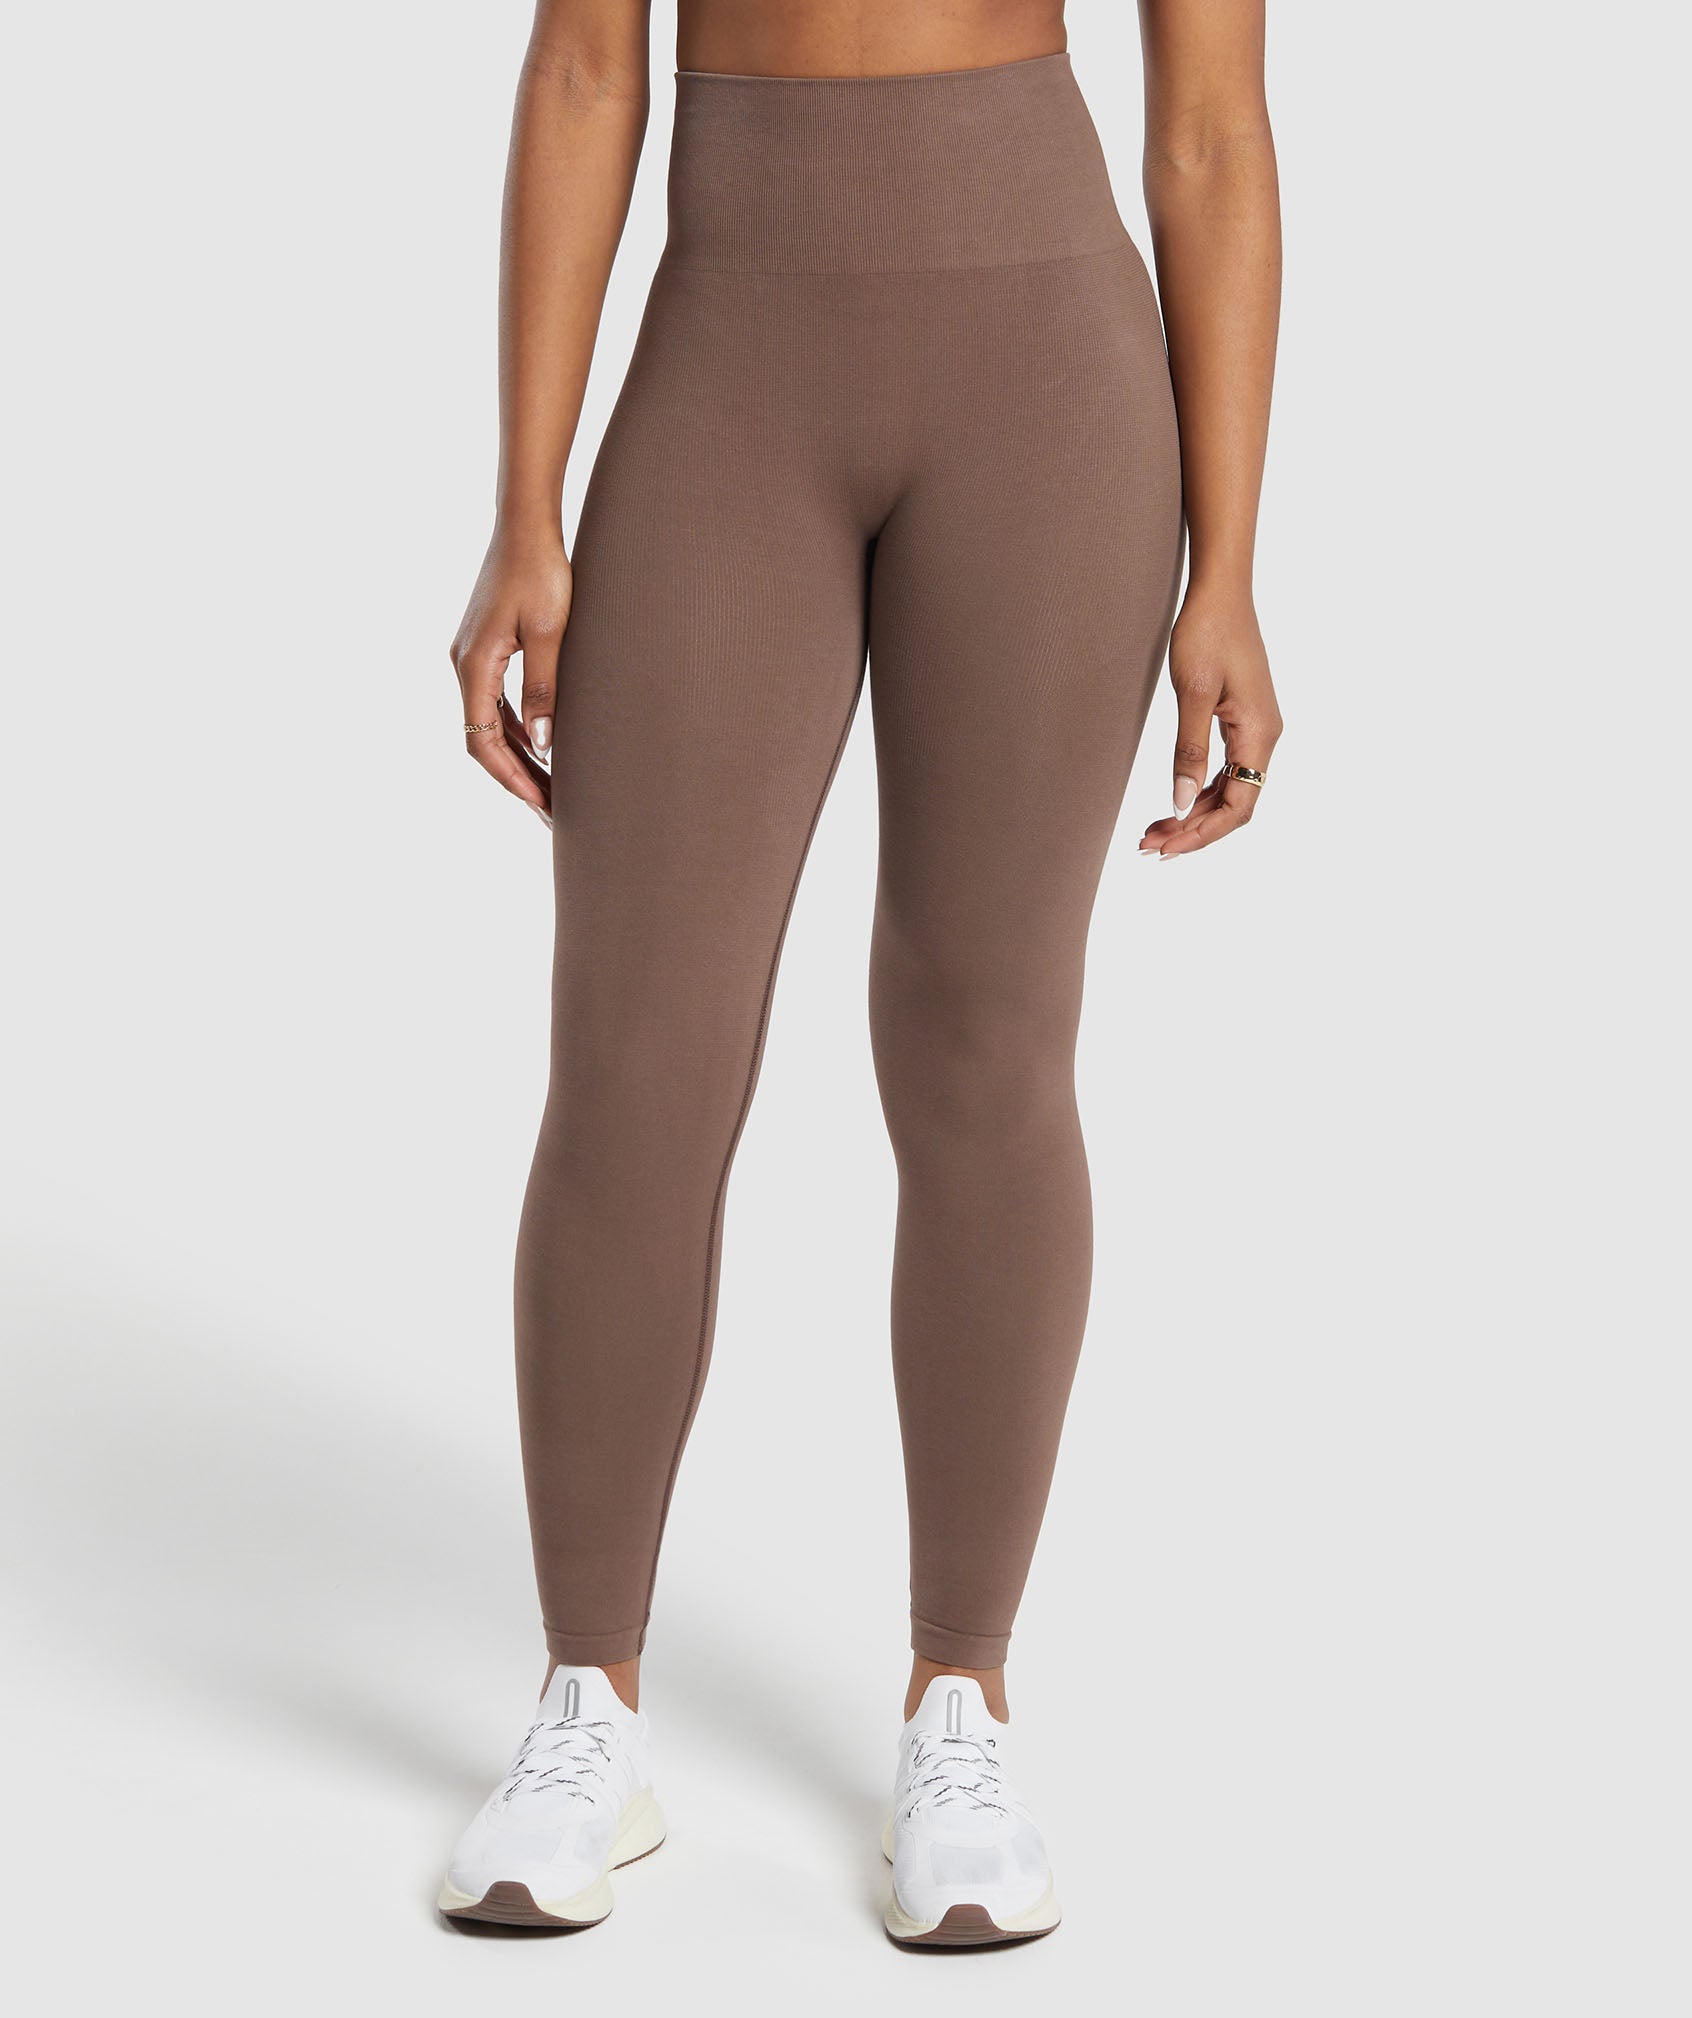 Cotton Seamless Leggings in Soft Brown